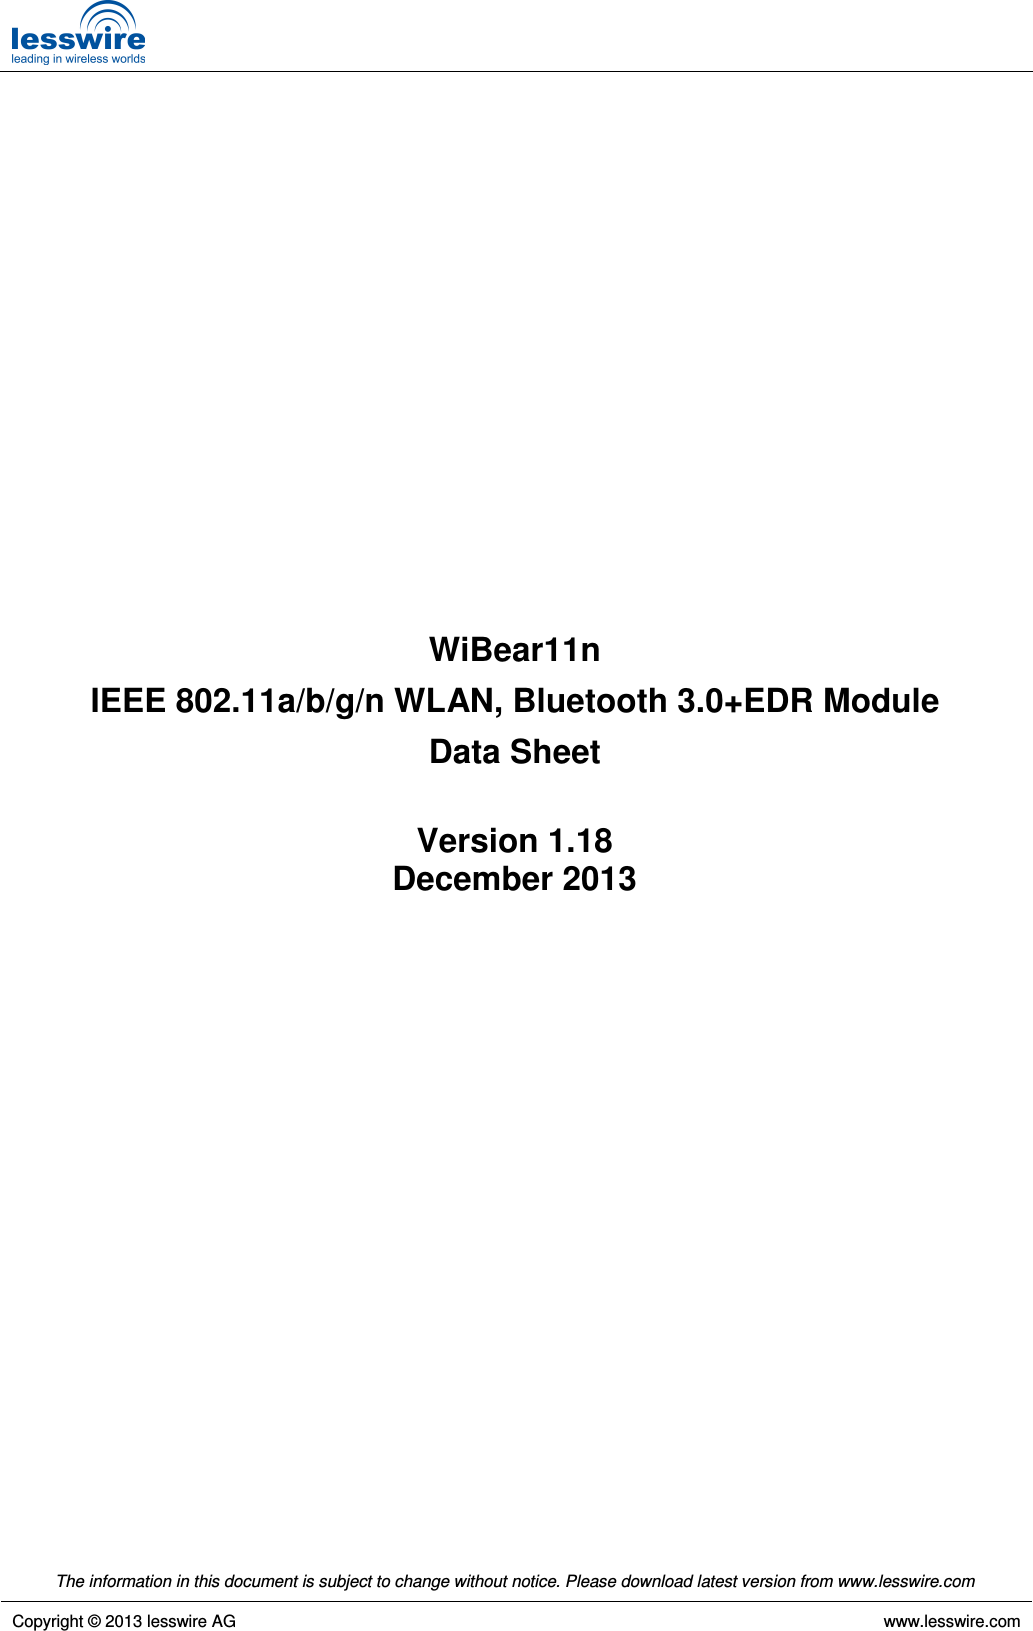   The information in this document is subject to change without notice. Please download latest version from www.lesswire.com   Copyright © 2013 lesswire AG     www.lesswire.com                    WiBear11n IEEE 802.11a/b/g/n WLAN, Bluetooth 3.0+EDR Module Data Sheet  Version 1.18 December 2013         